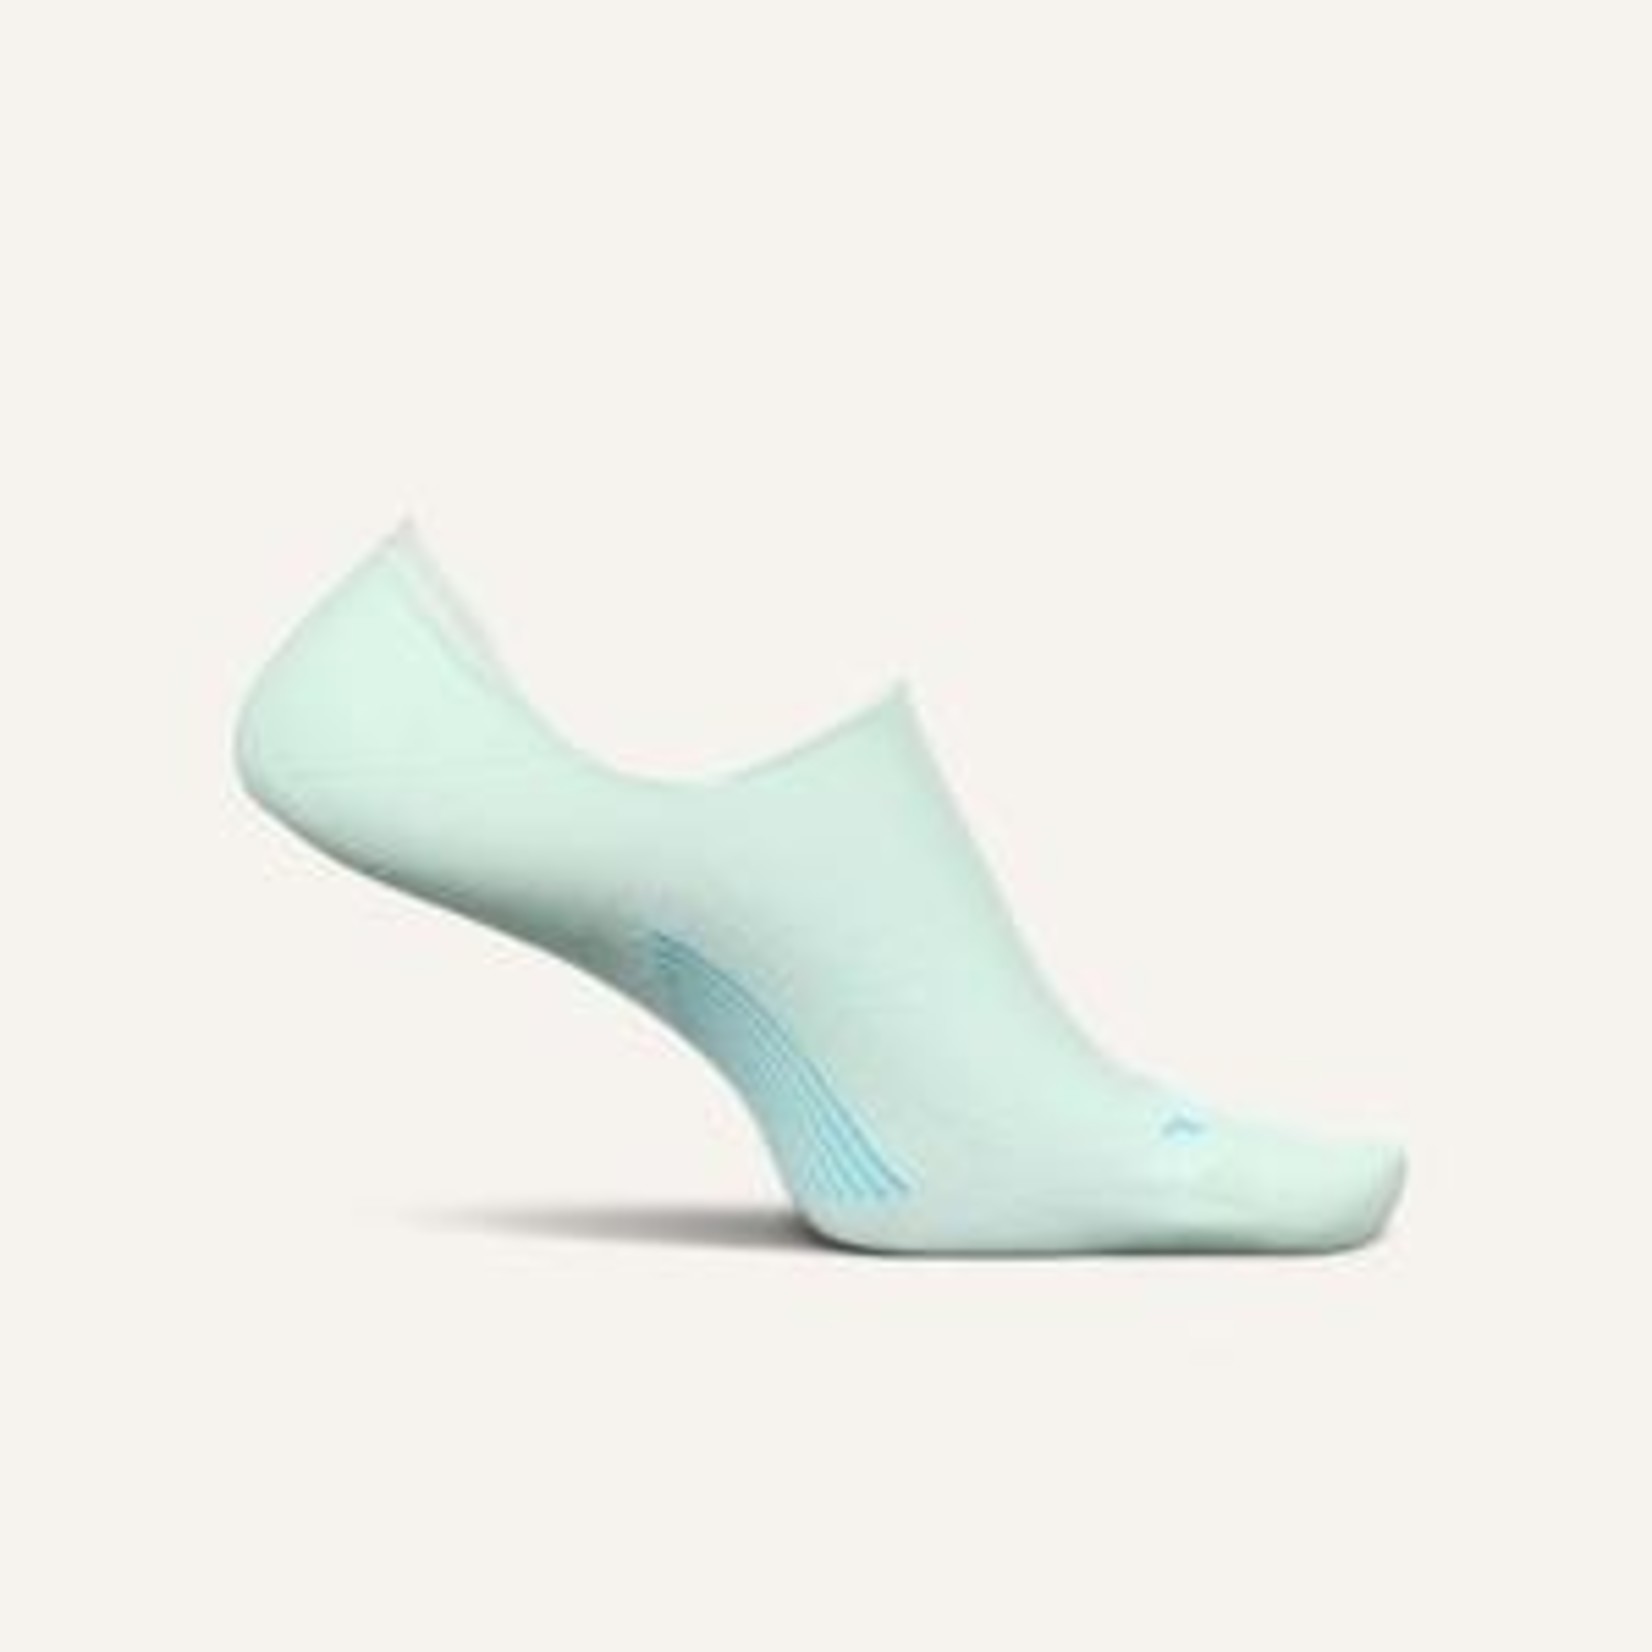 Feetures Feetures Women's Everyday Ultra Light No-Show